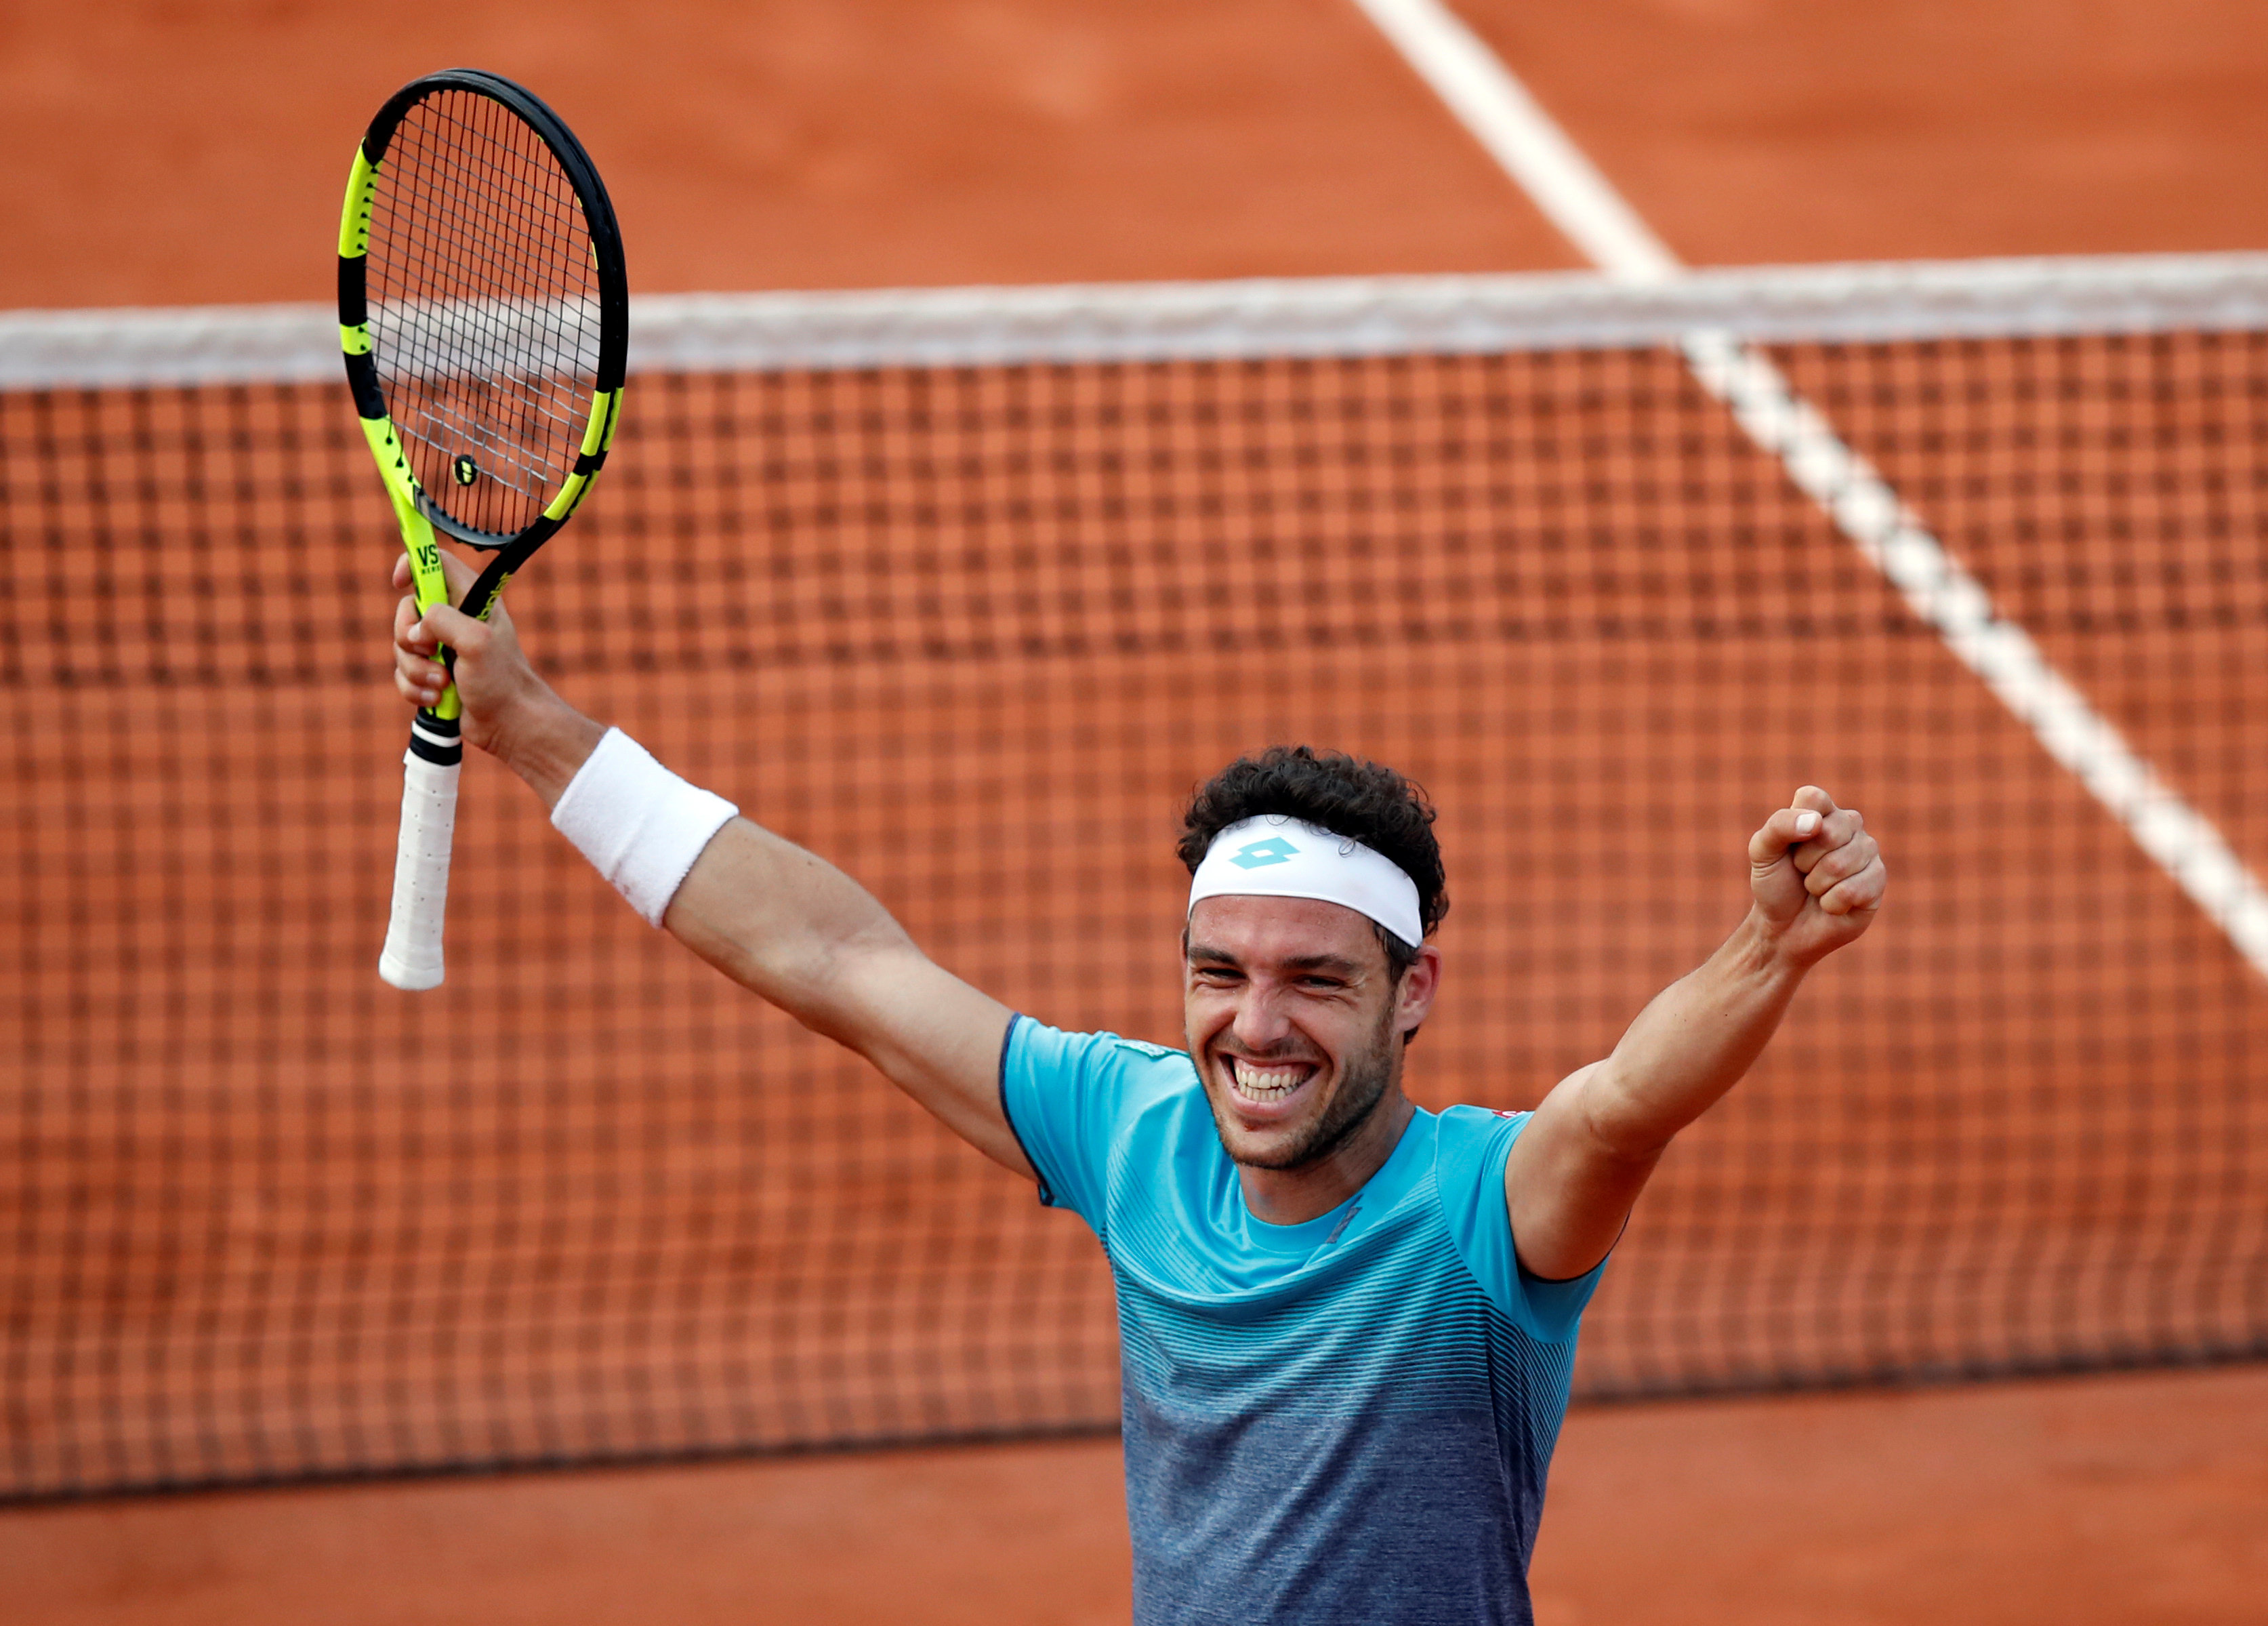 French Open: Cecchinato upsets Goffin to reach last eight